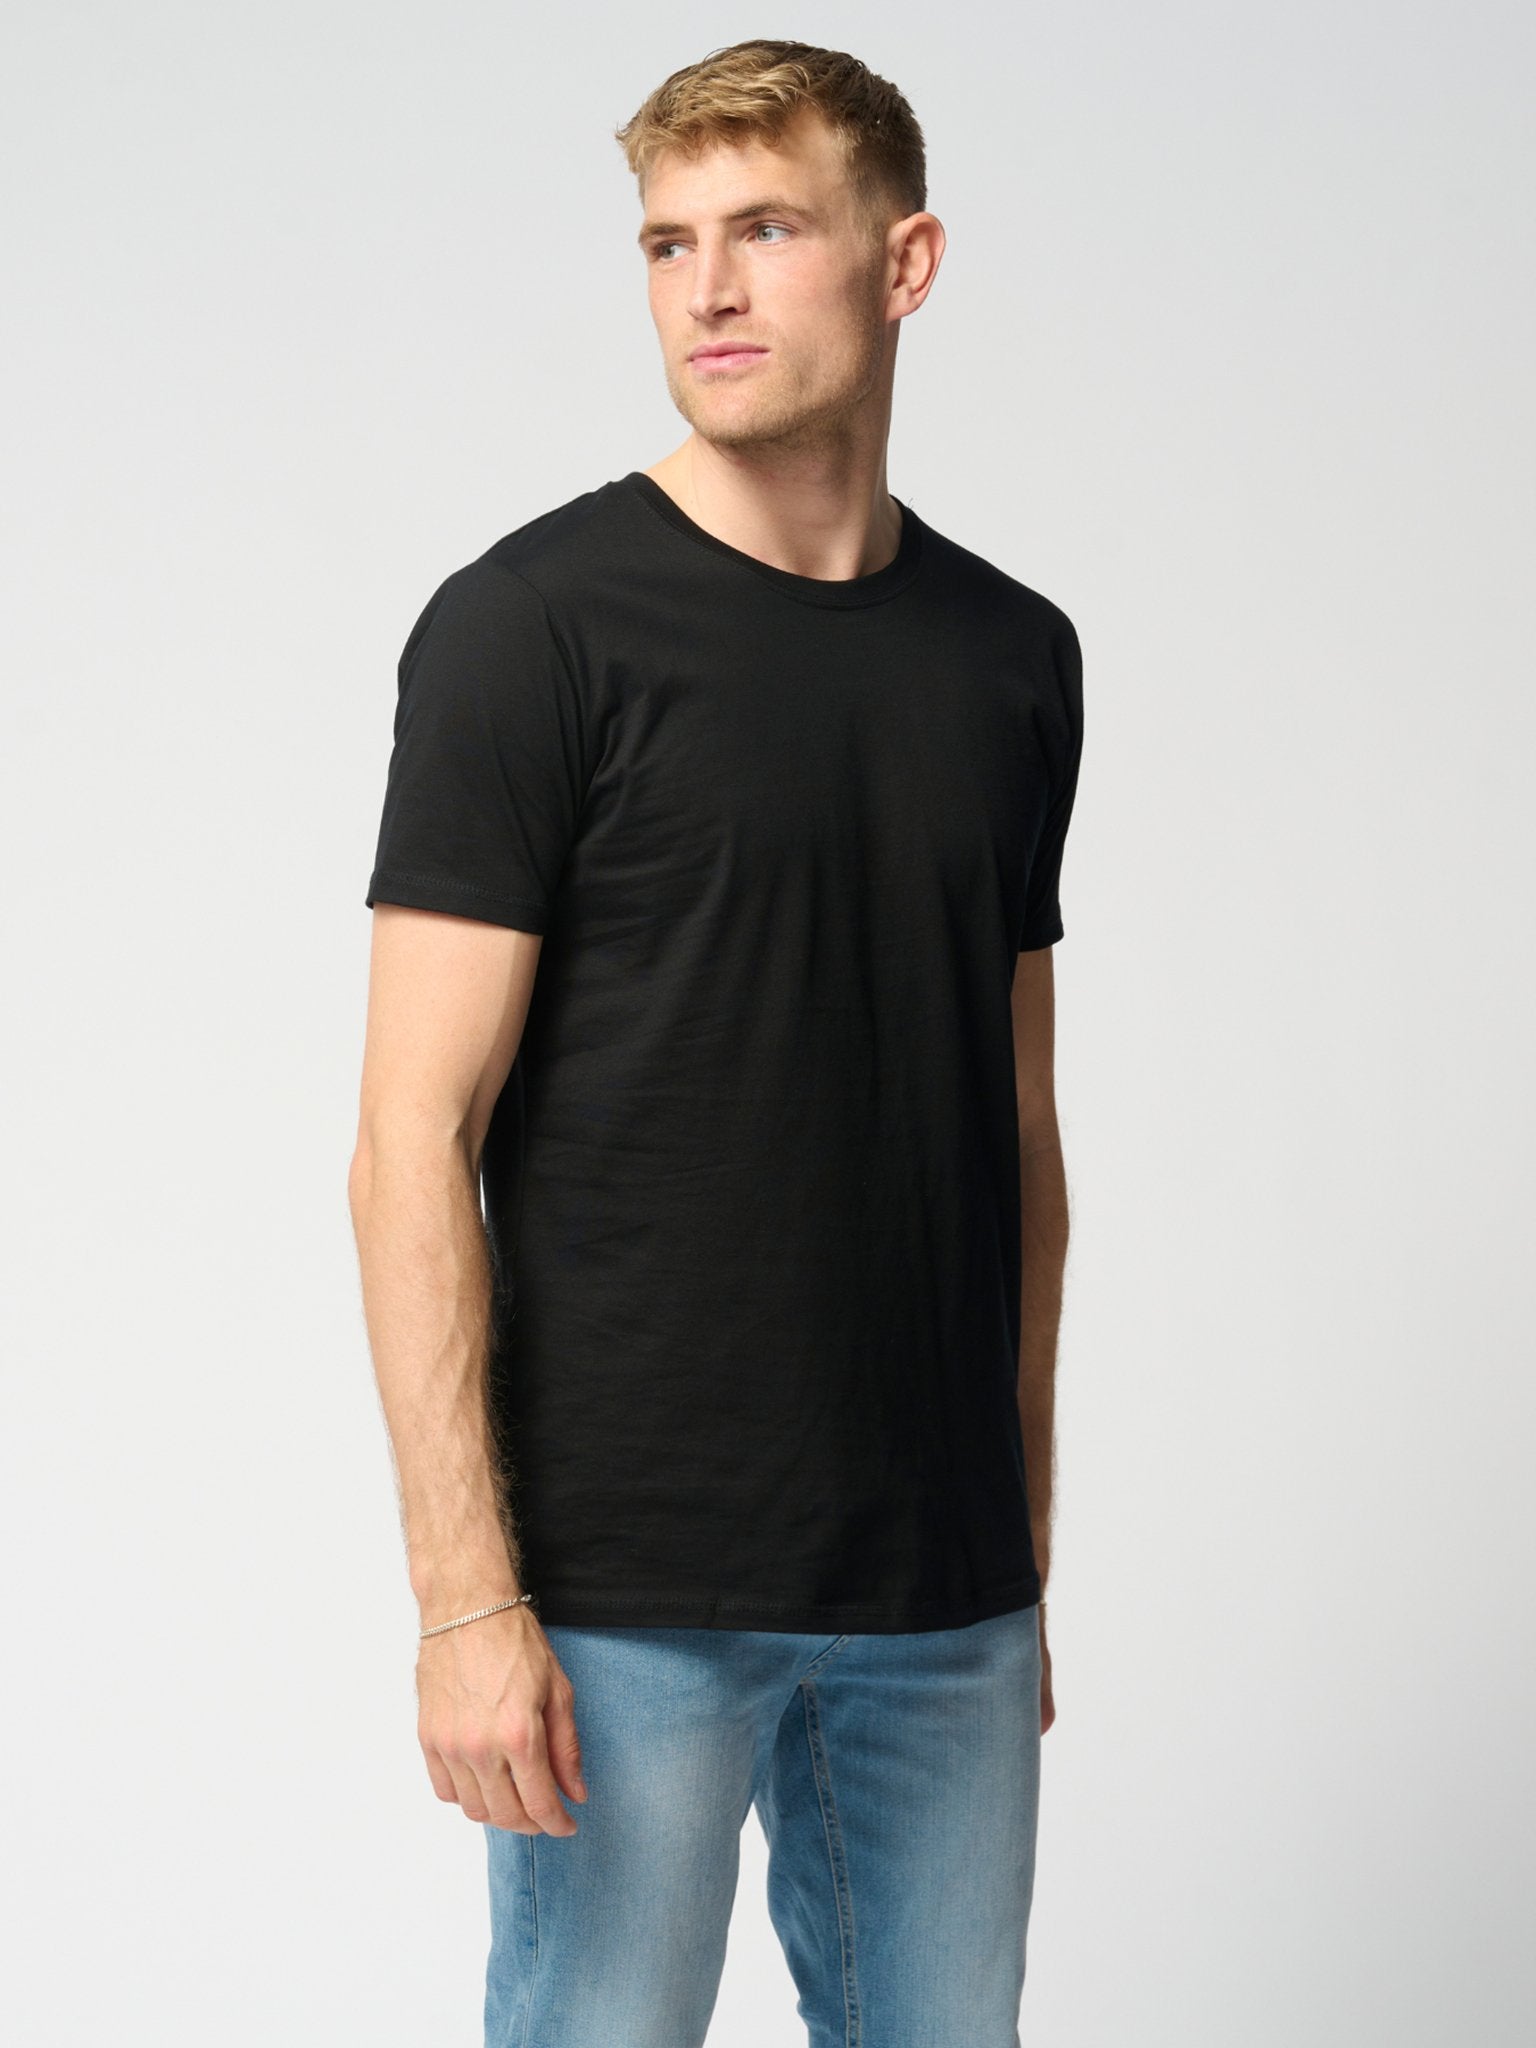 Muscle T-Shirts: Fit and Functionality